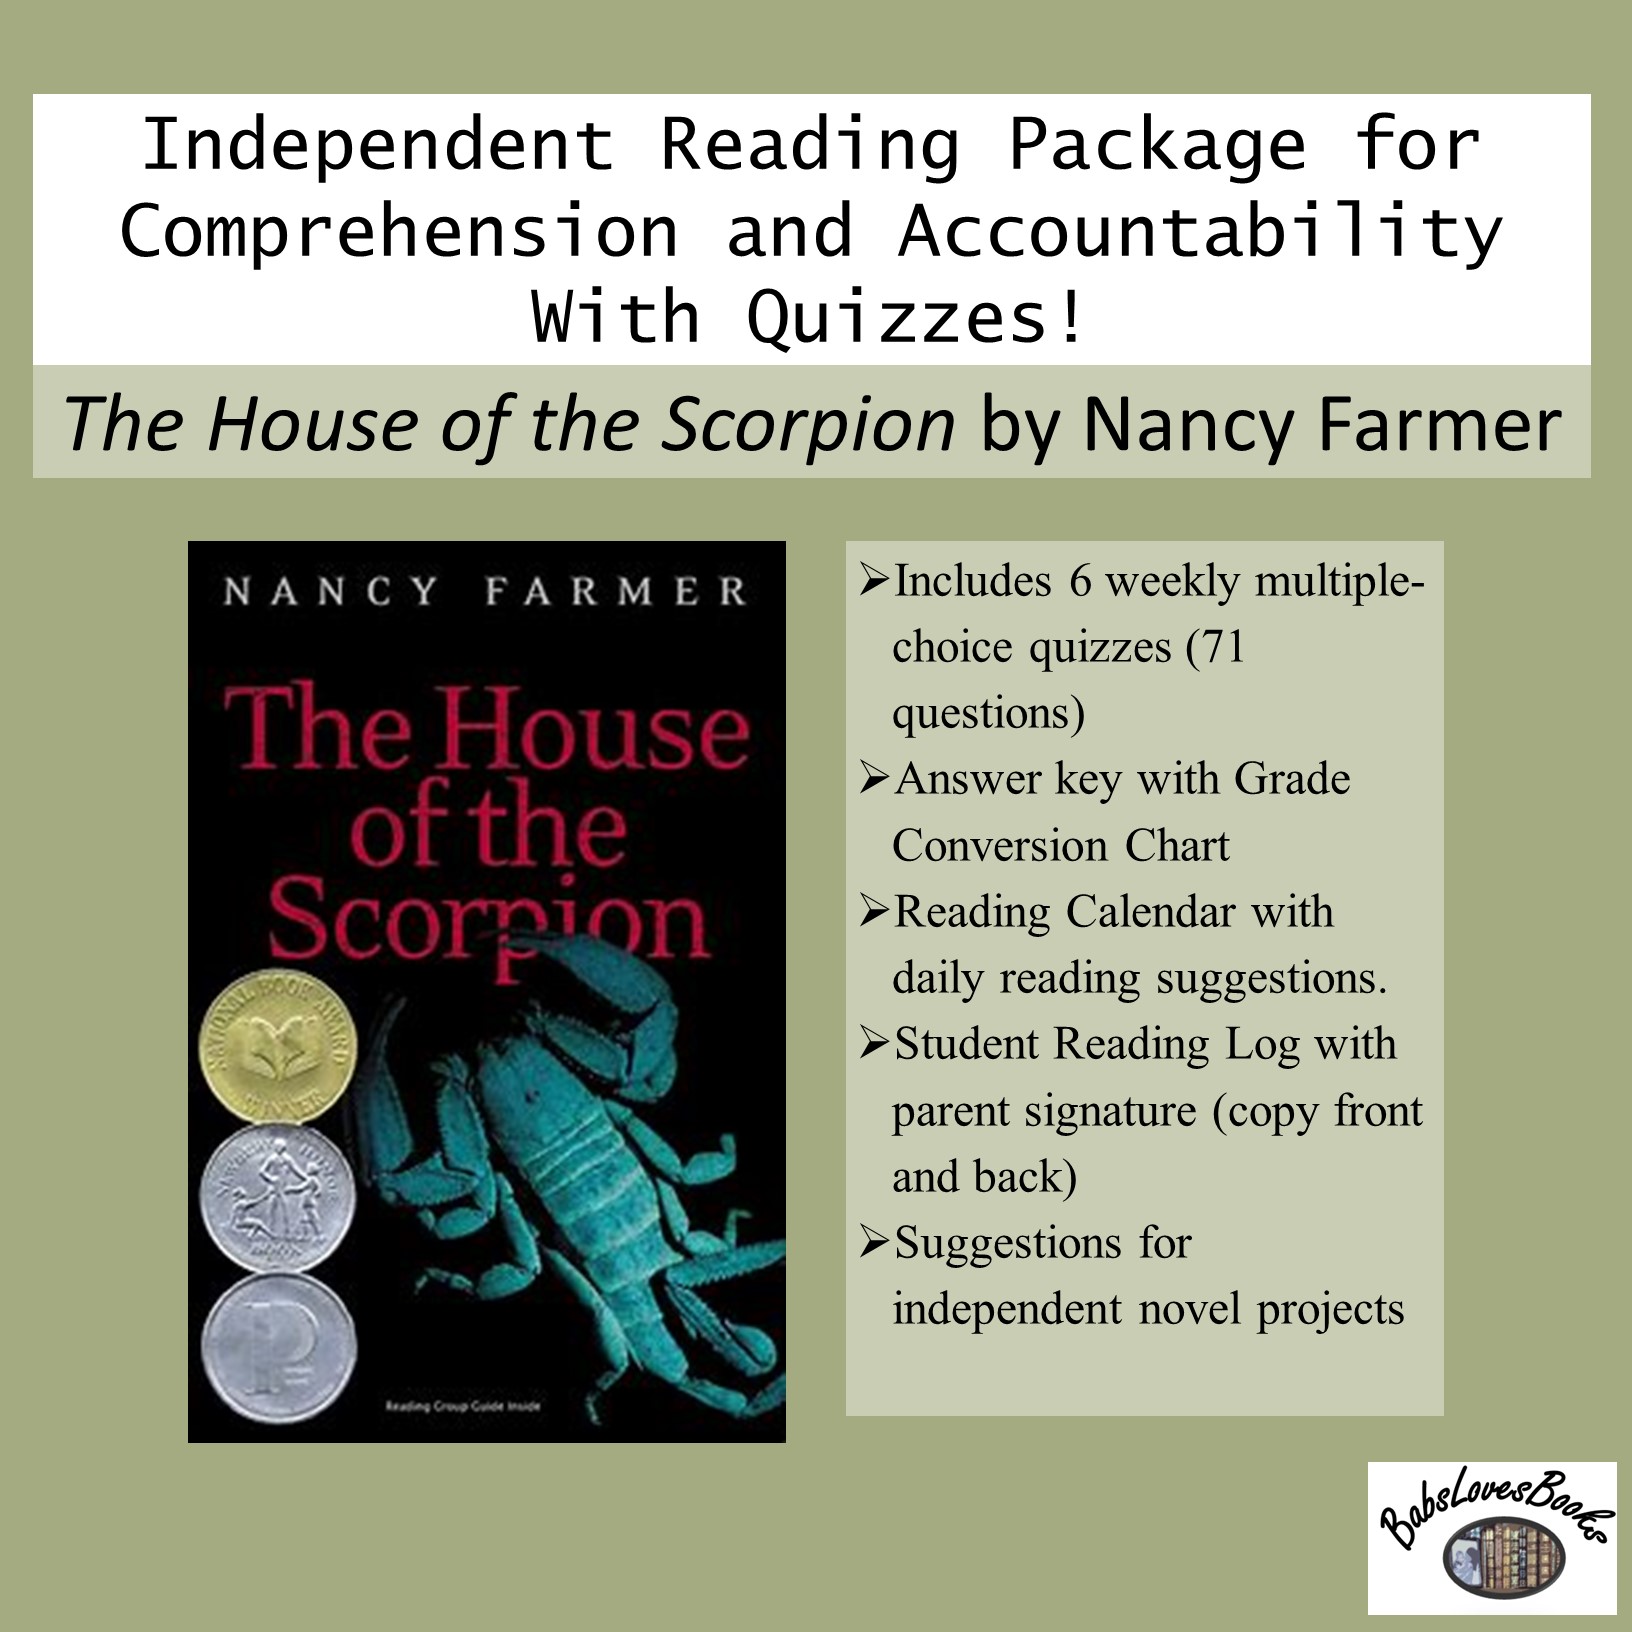 The House of the Scorpion Independent Reading Package with Quizzes!